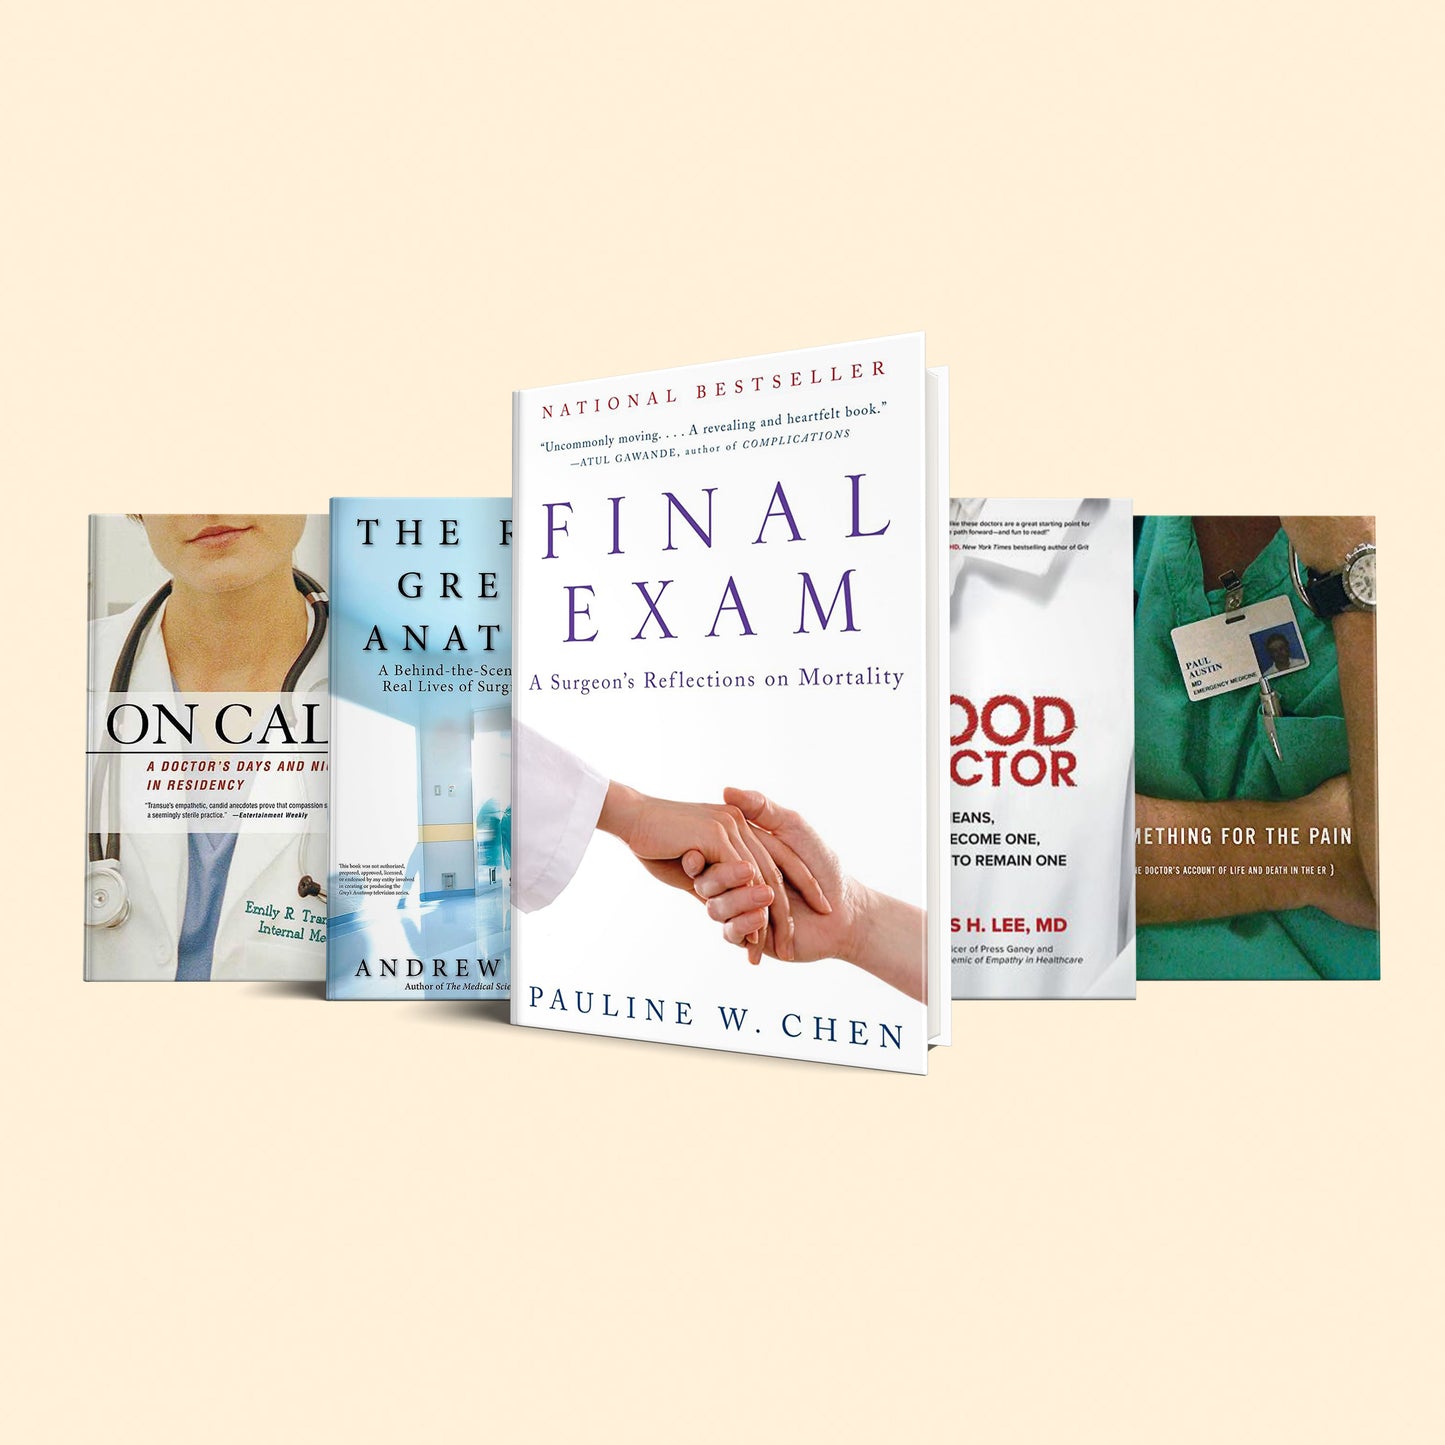 The Surgical Experience: A Collection of Books on the Life of a Surgeon